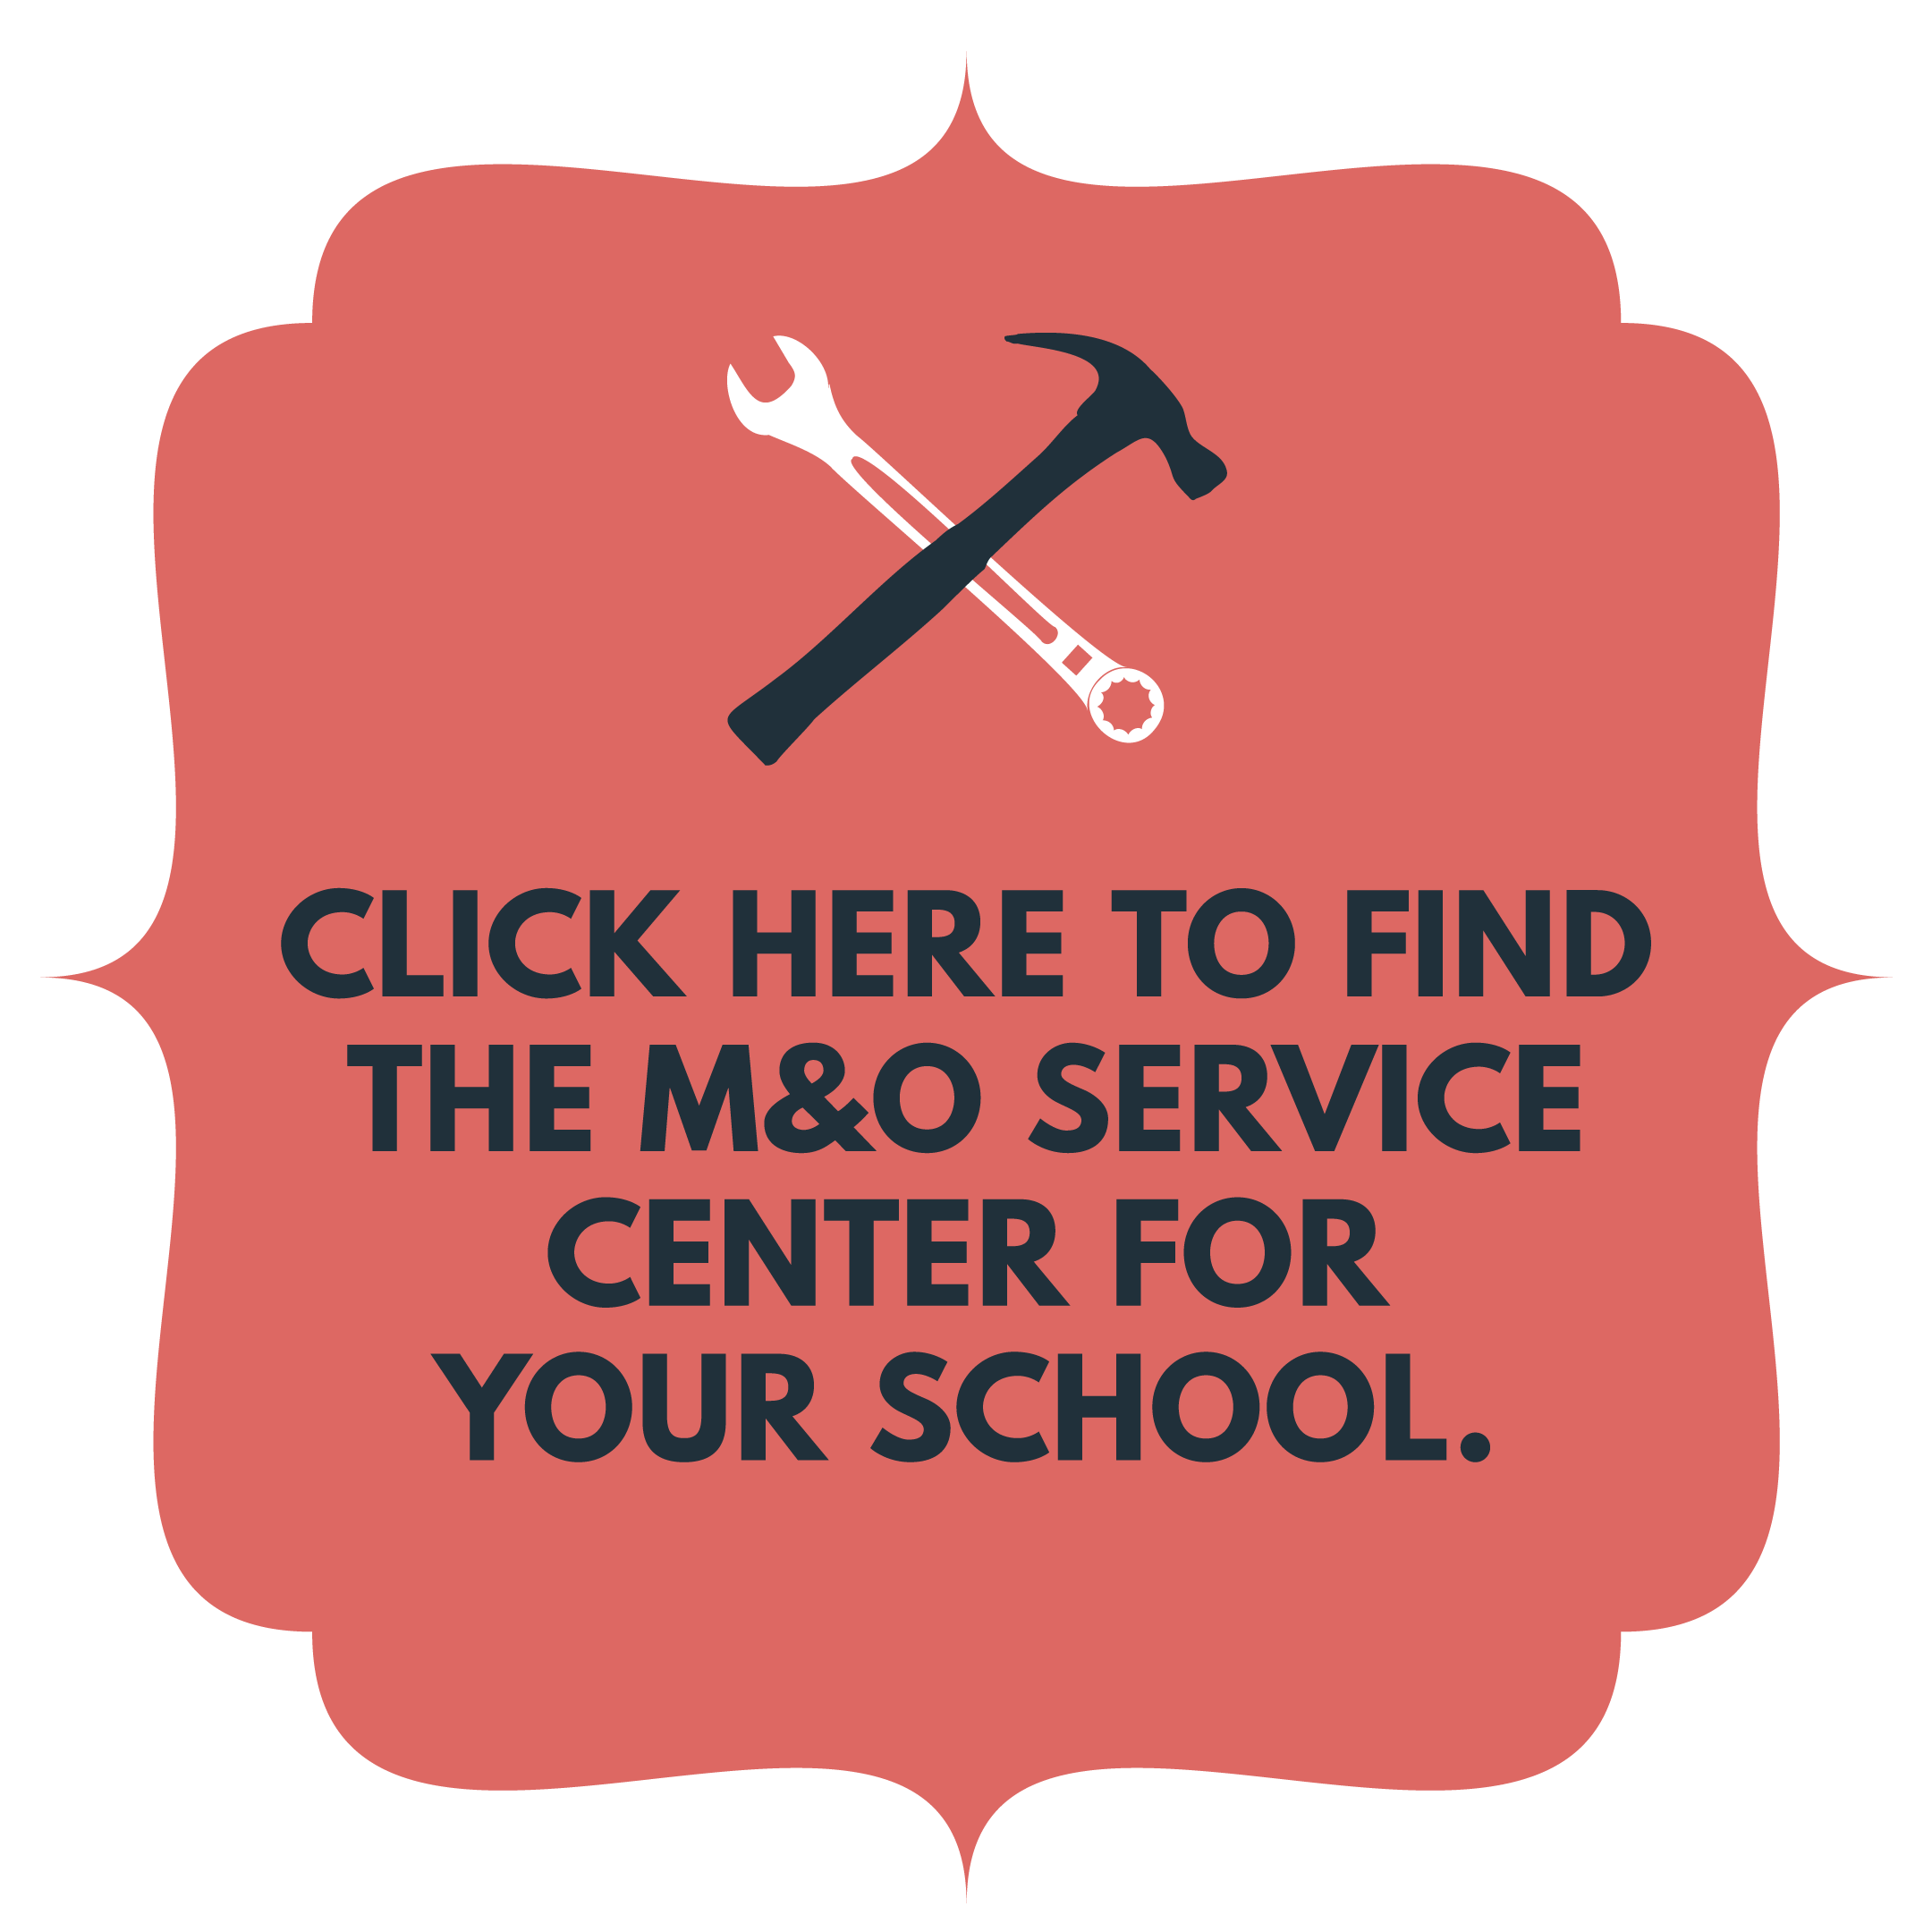 Click here to find the M&O service center for your school